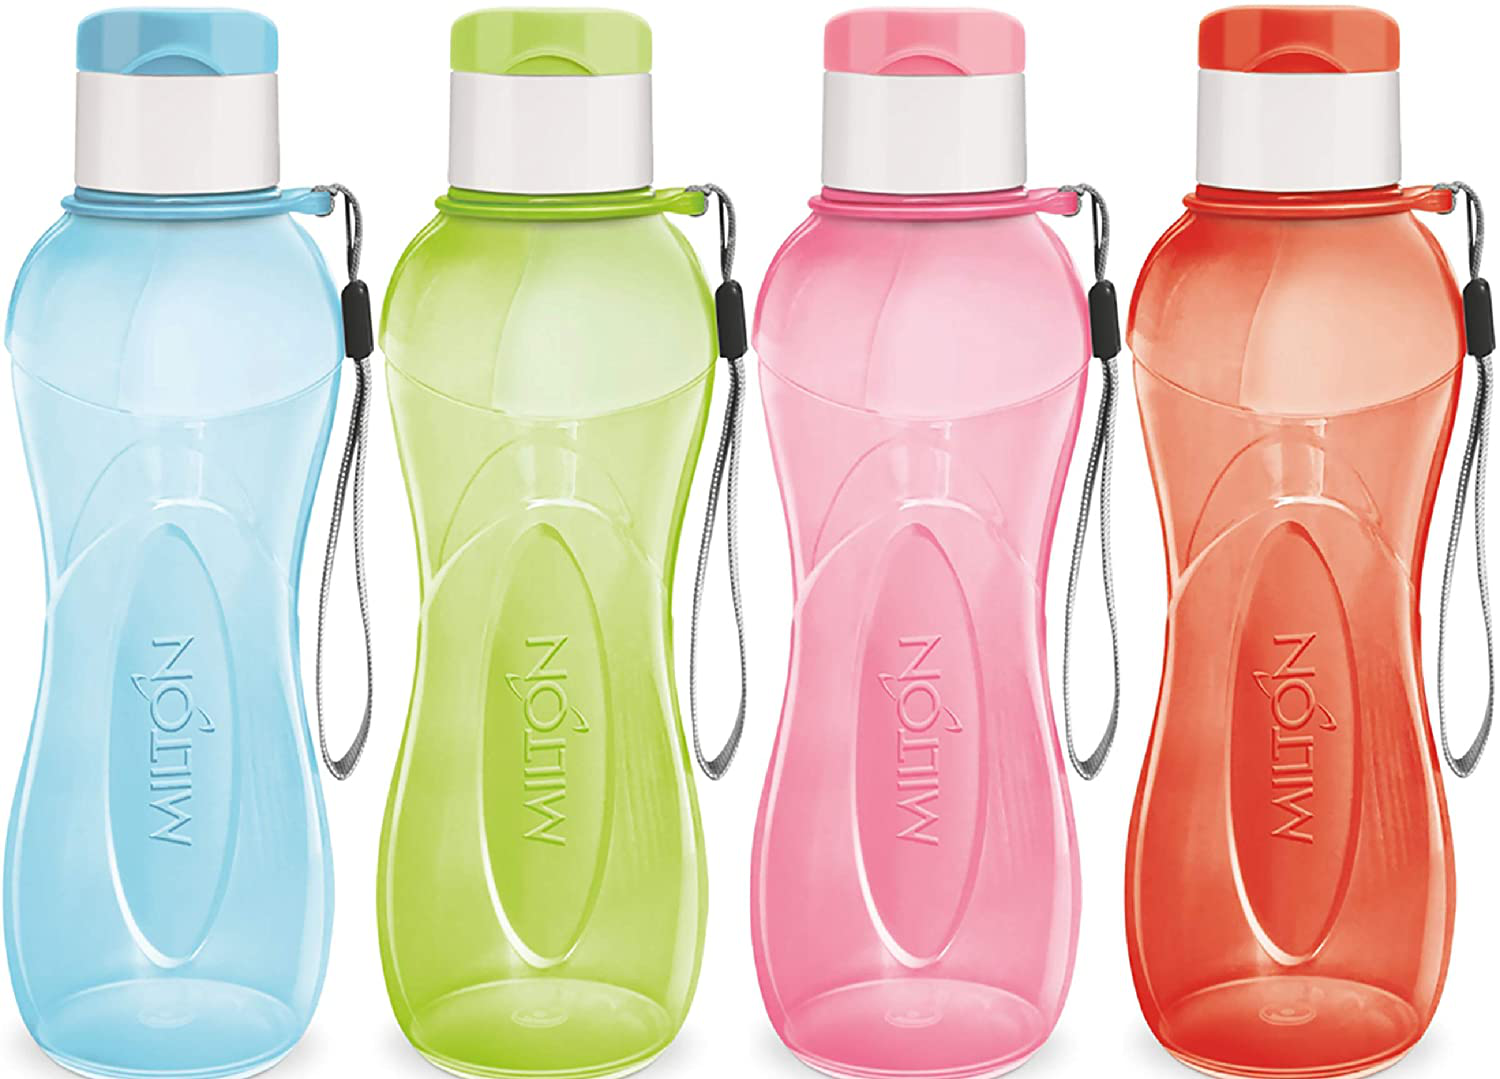 Sports Water Bottle - Milton Kids Reusable Leak-proof 25 oz 4 Set Plastic Wide Mouth Large Big Drink Bottle BPA & Leak Free With Handle Strap Carrier For Cycling Camping Hiking Gym Yoga